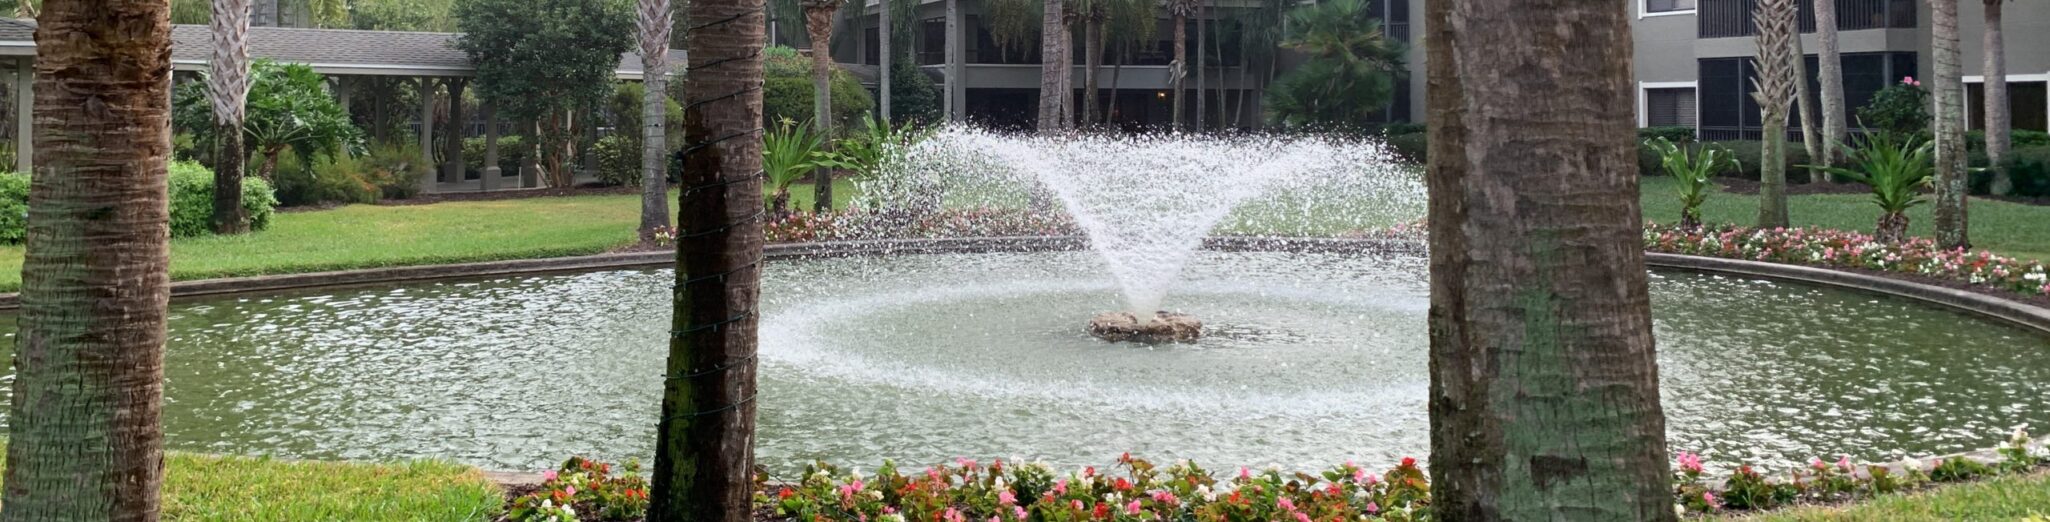 SPS fountain at south port square a senior living community in Port Charlotte FL